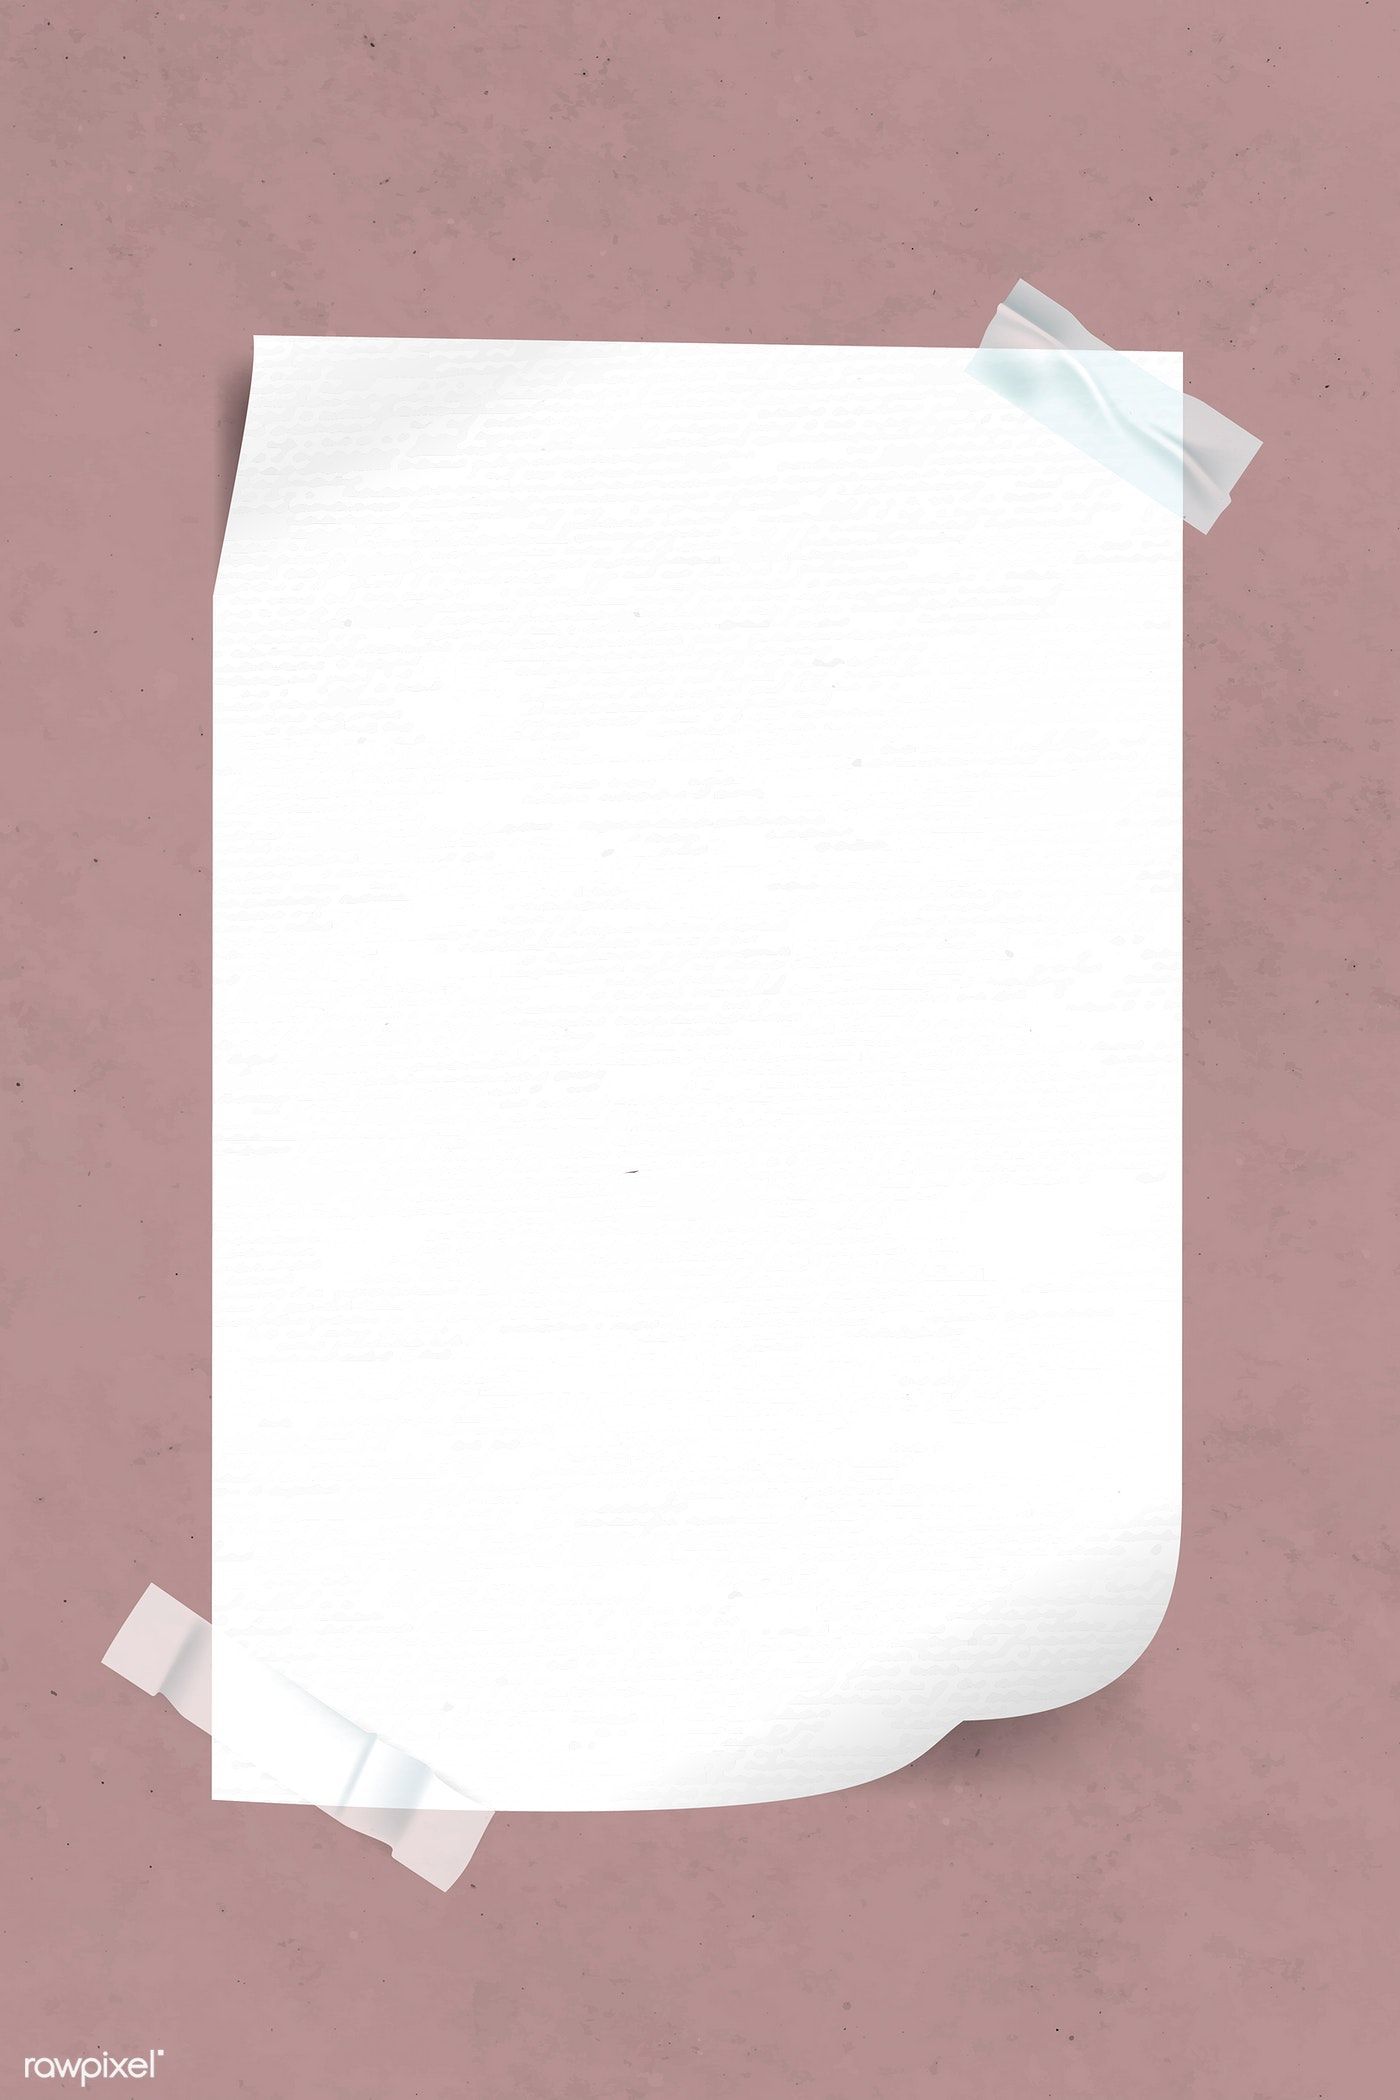 Download premium illustration of Blank white paper taped on pink